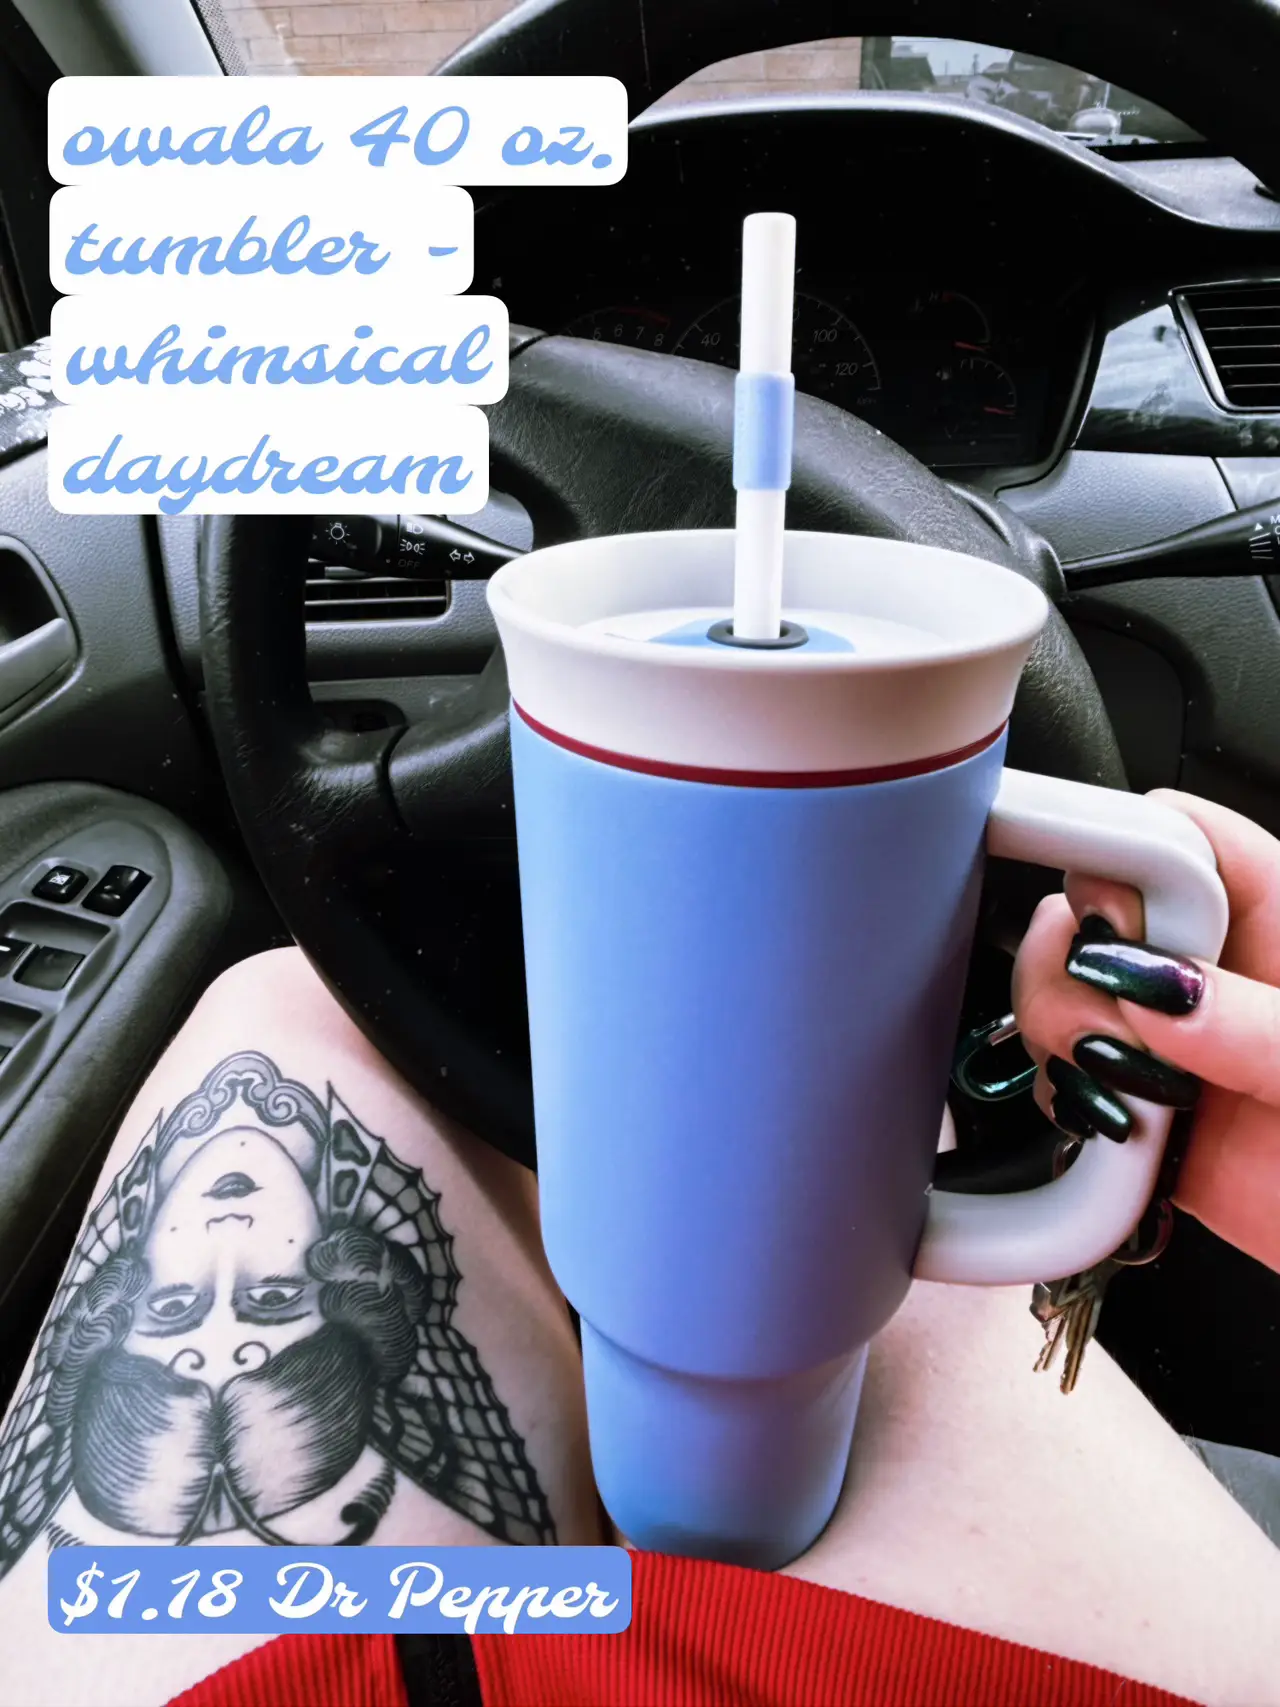 Owala 40oz Stainless Steel Tumbler with Handle - Whimsical Daydream